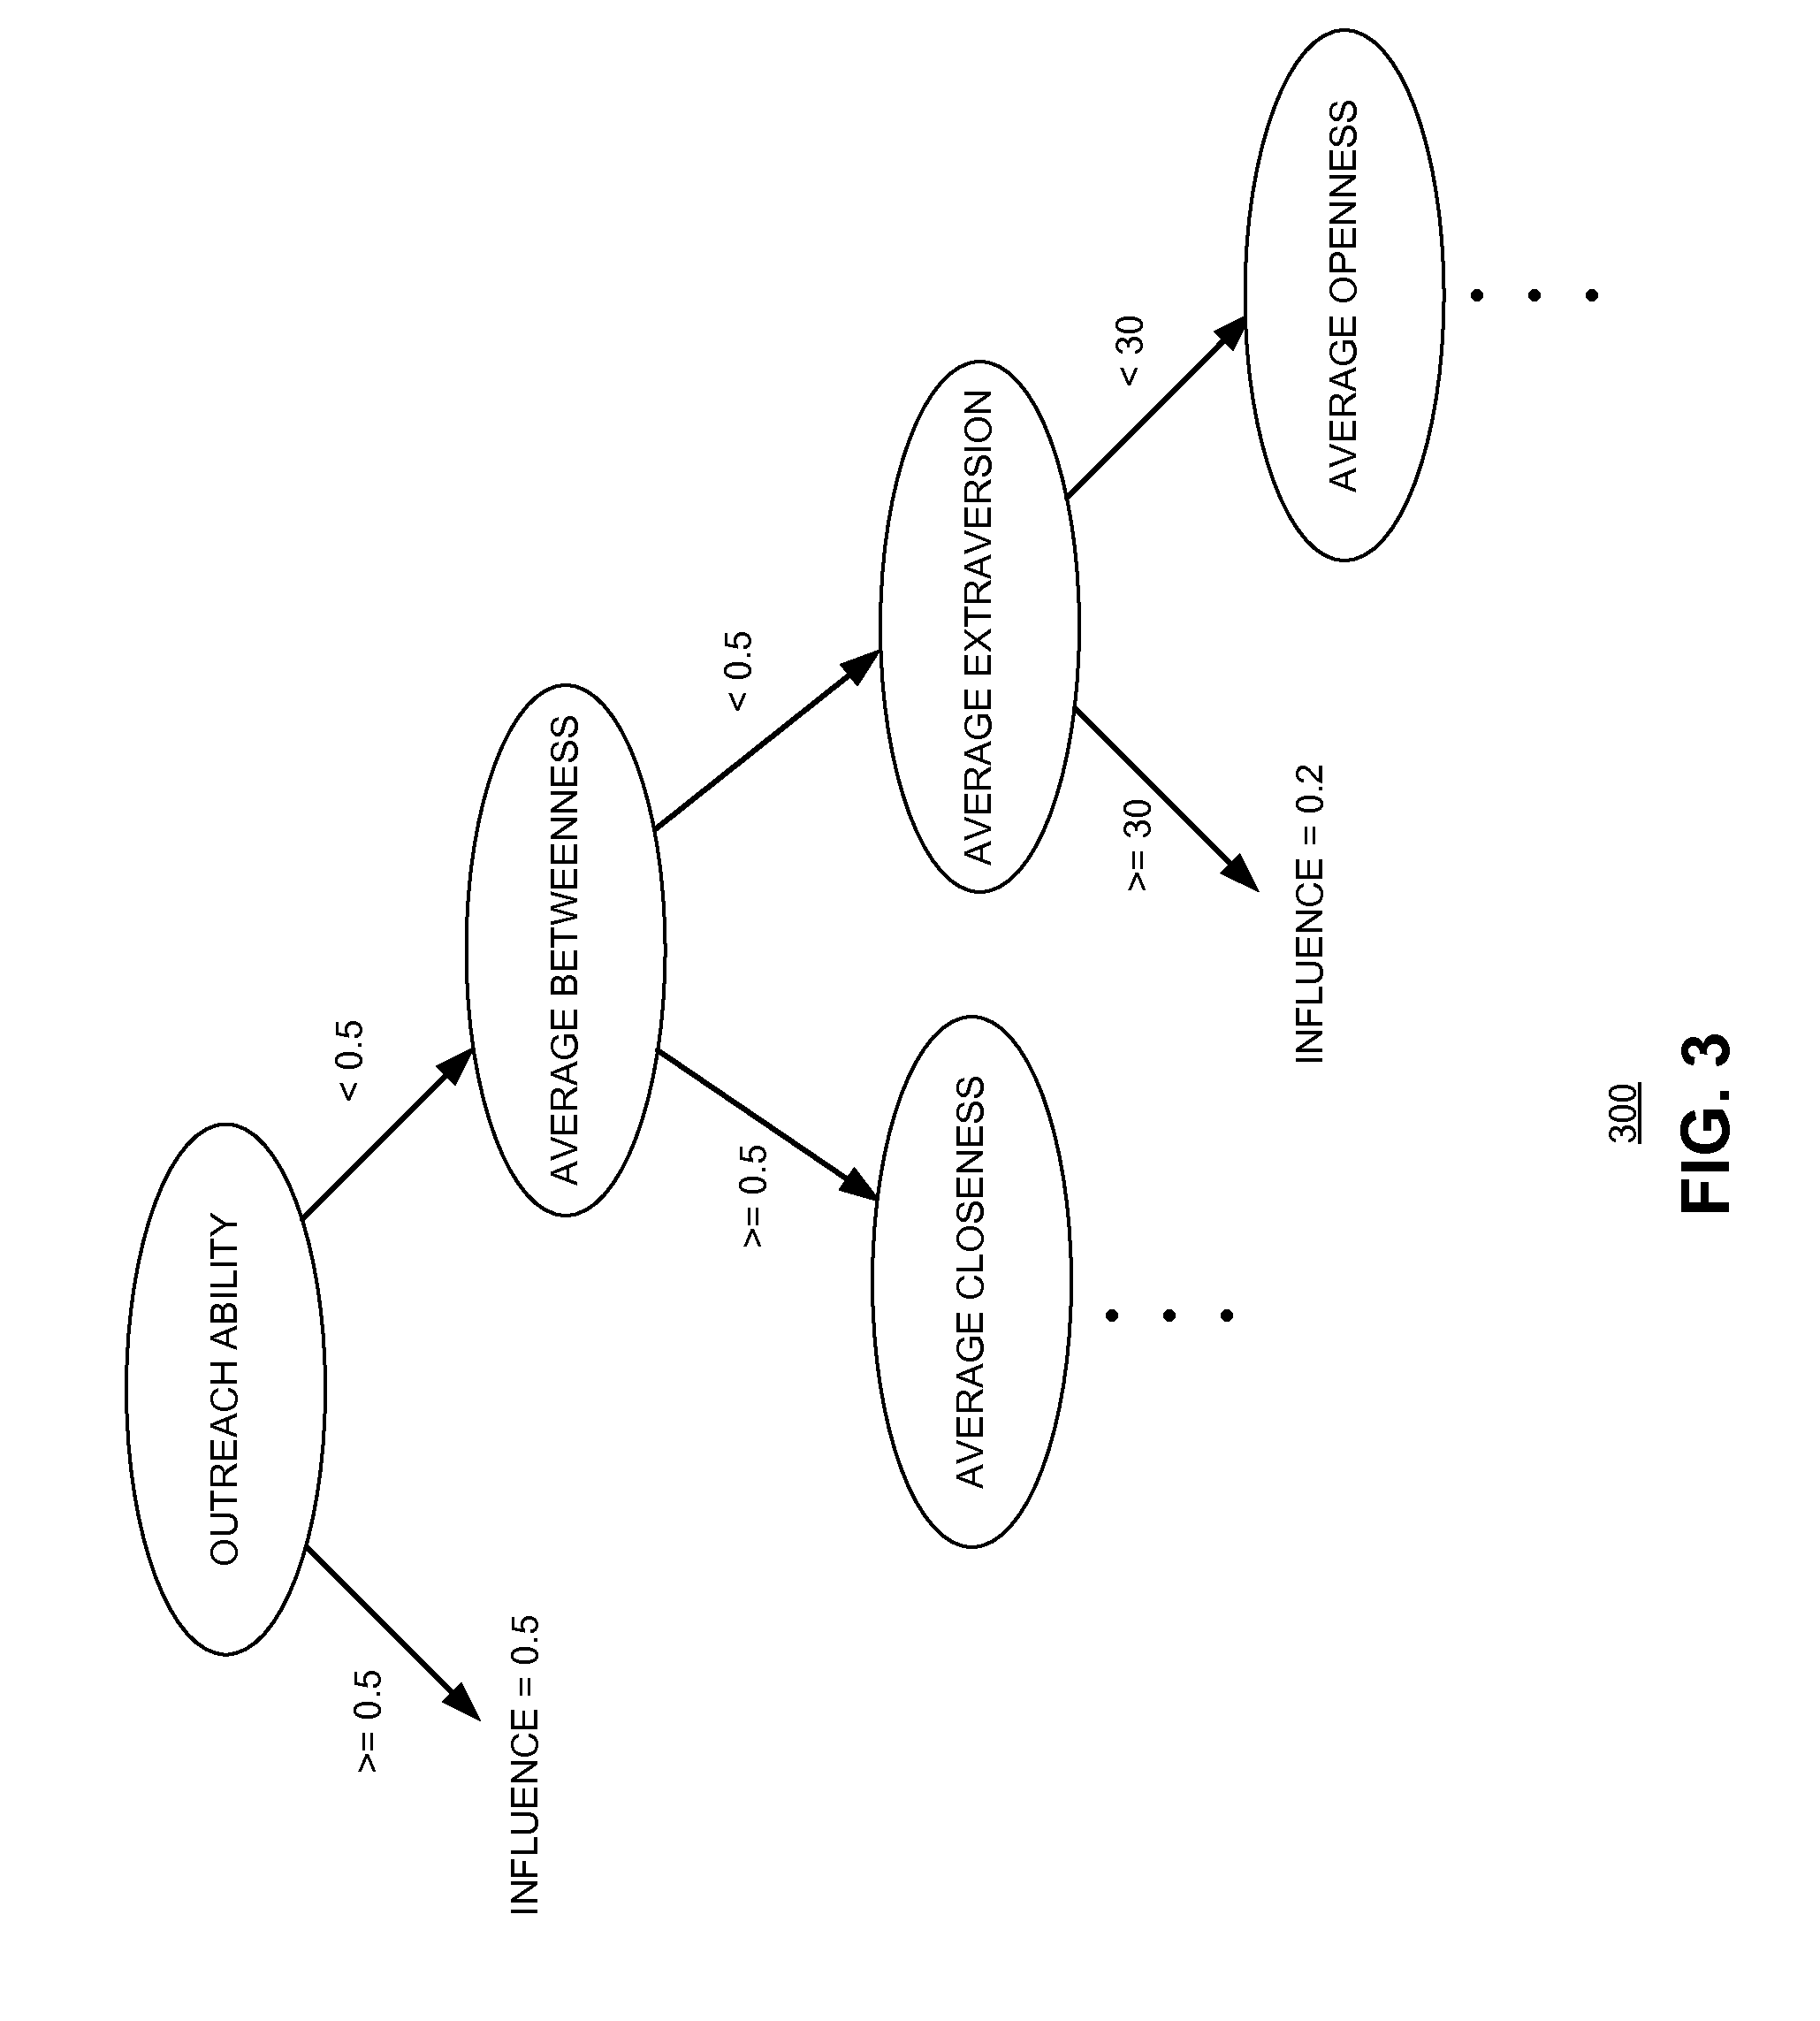 System and method for identifying key targets in a social network by heuristically approximating influence